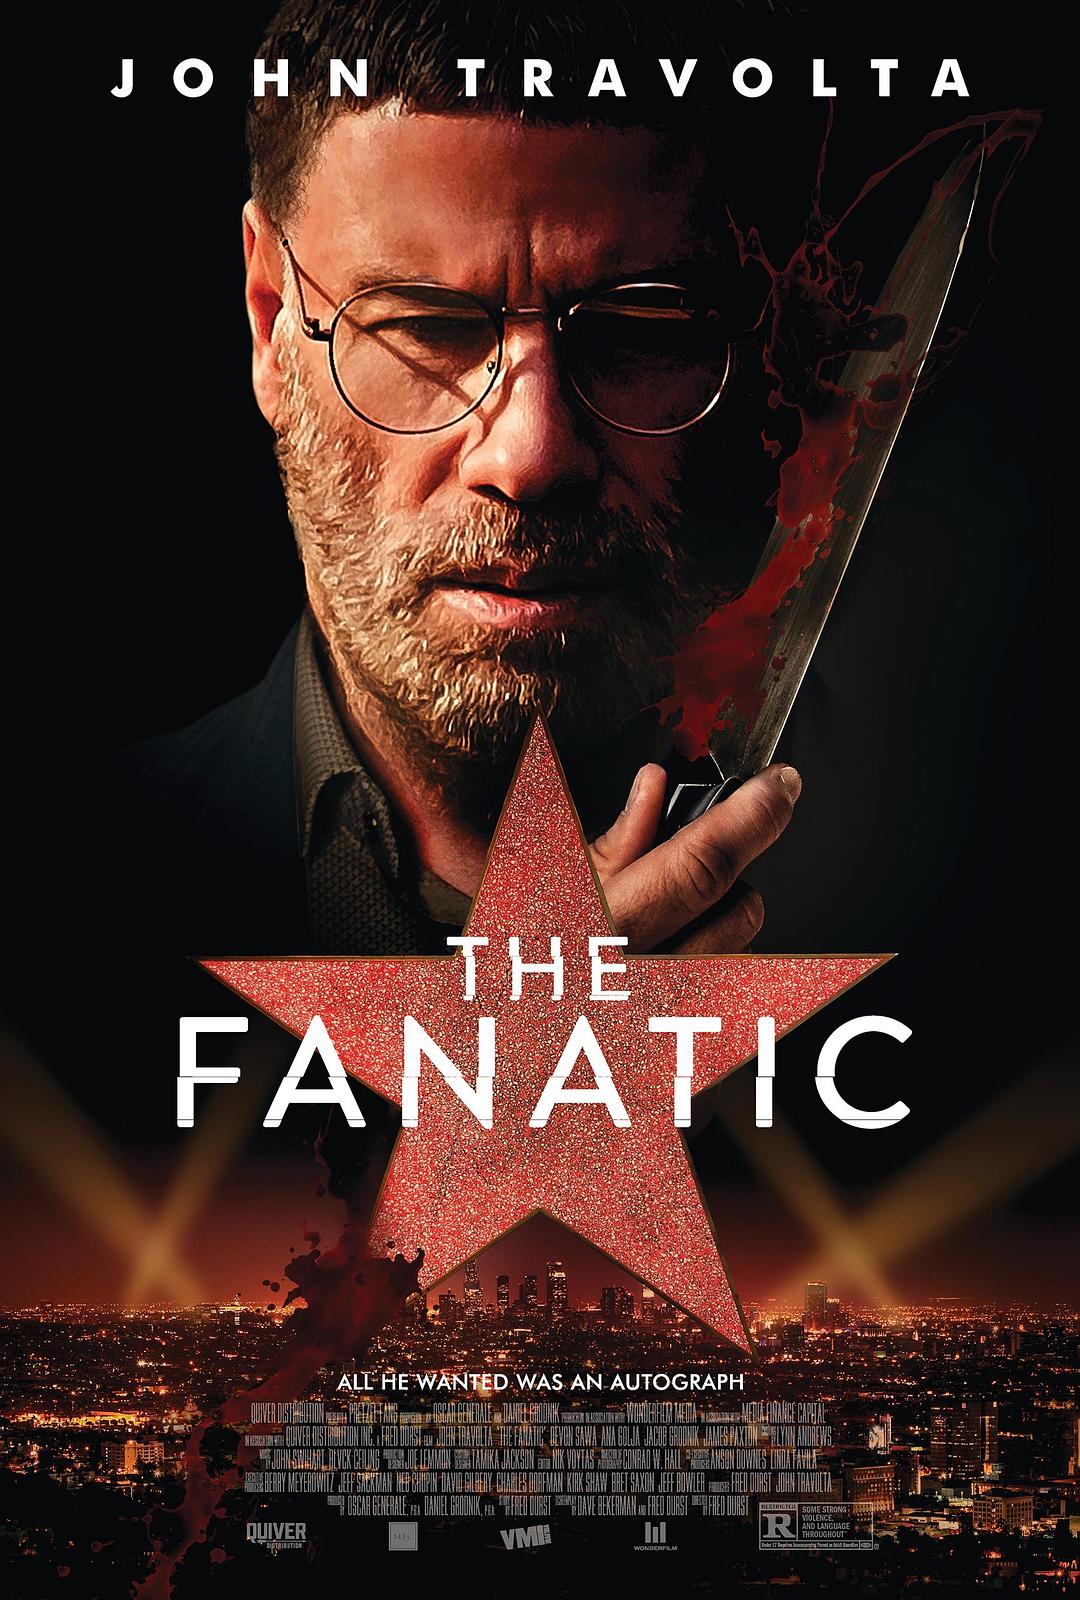  The.Fanatic.2019.720p.BluRay.x264.DD5.1-FGT 3.69GB-1.png